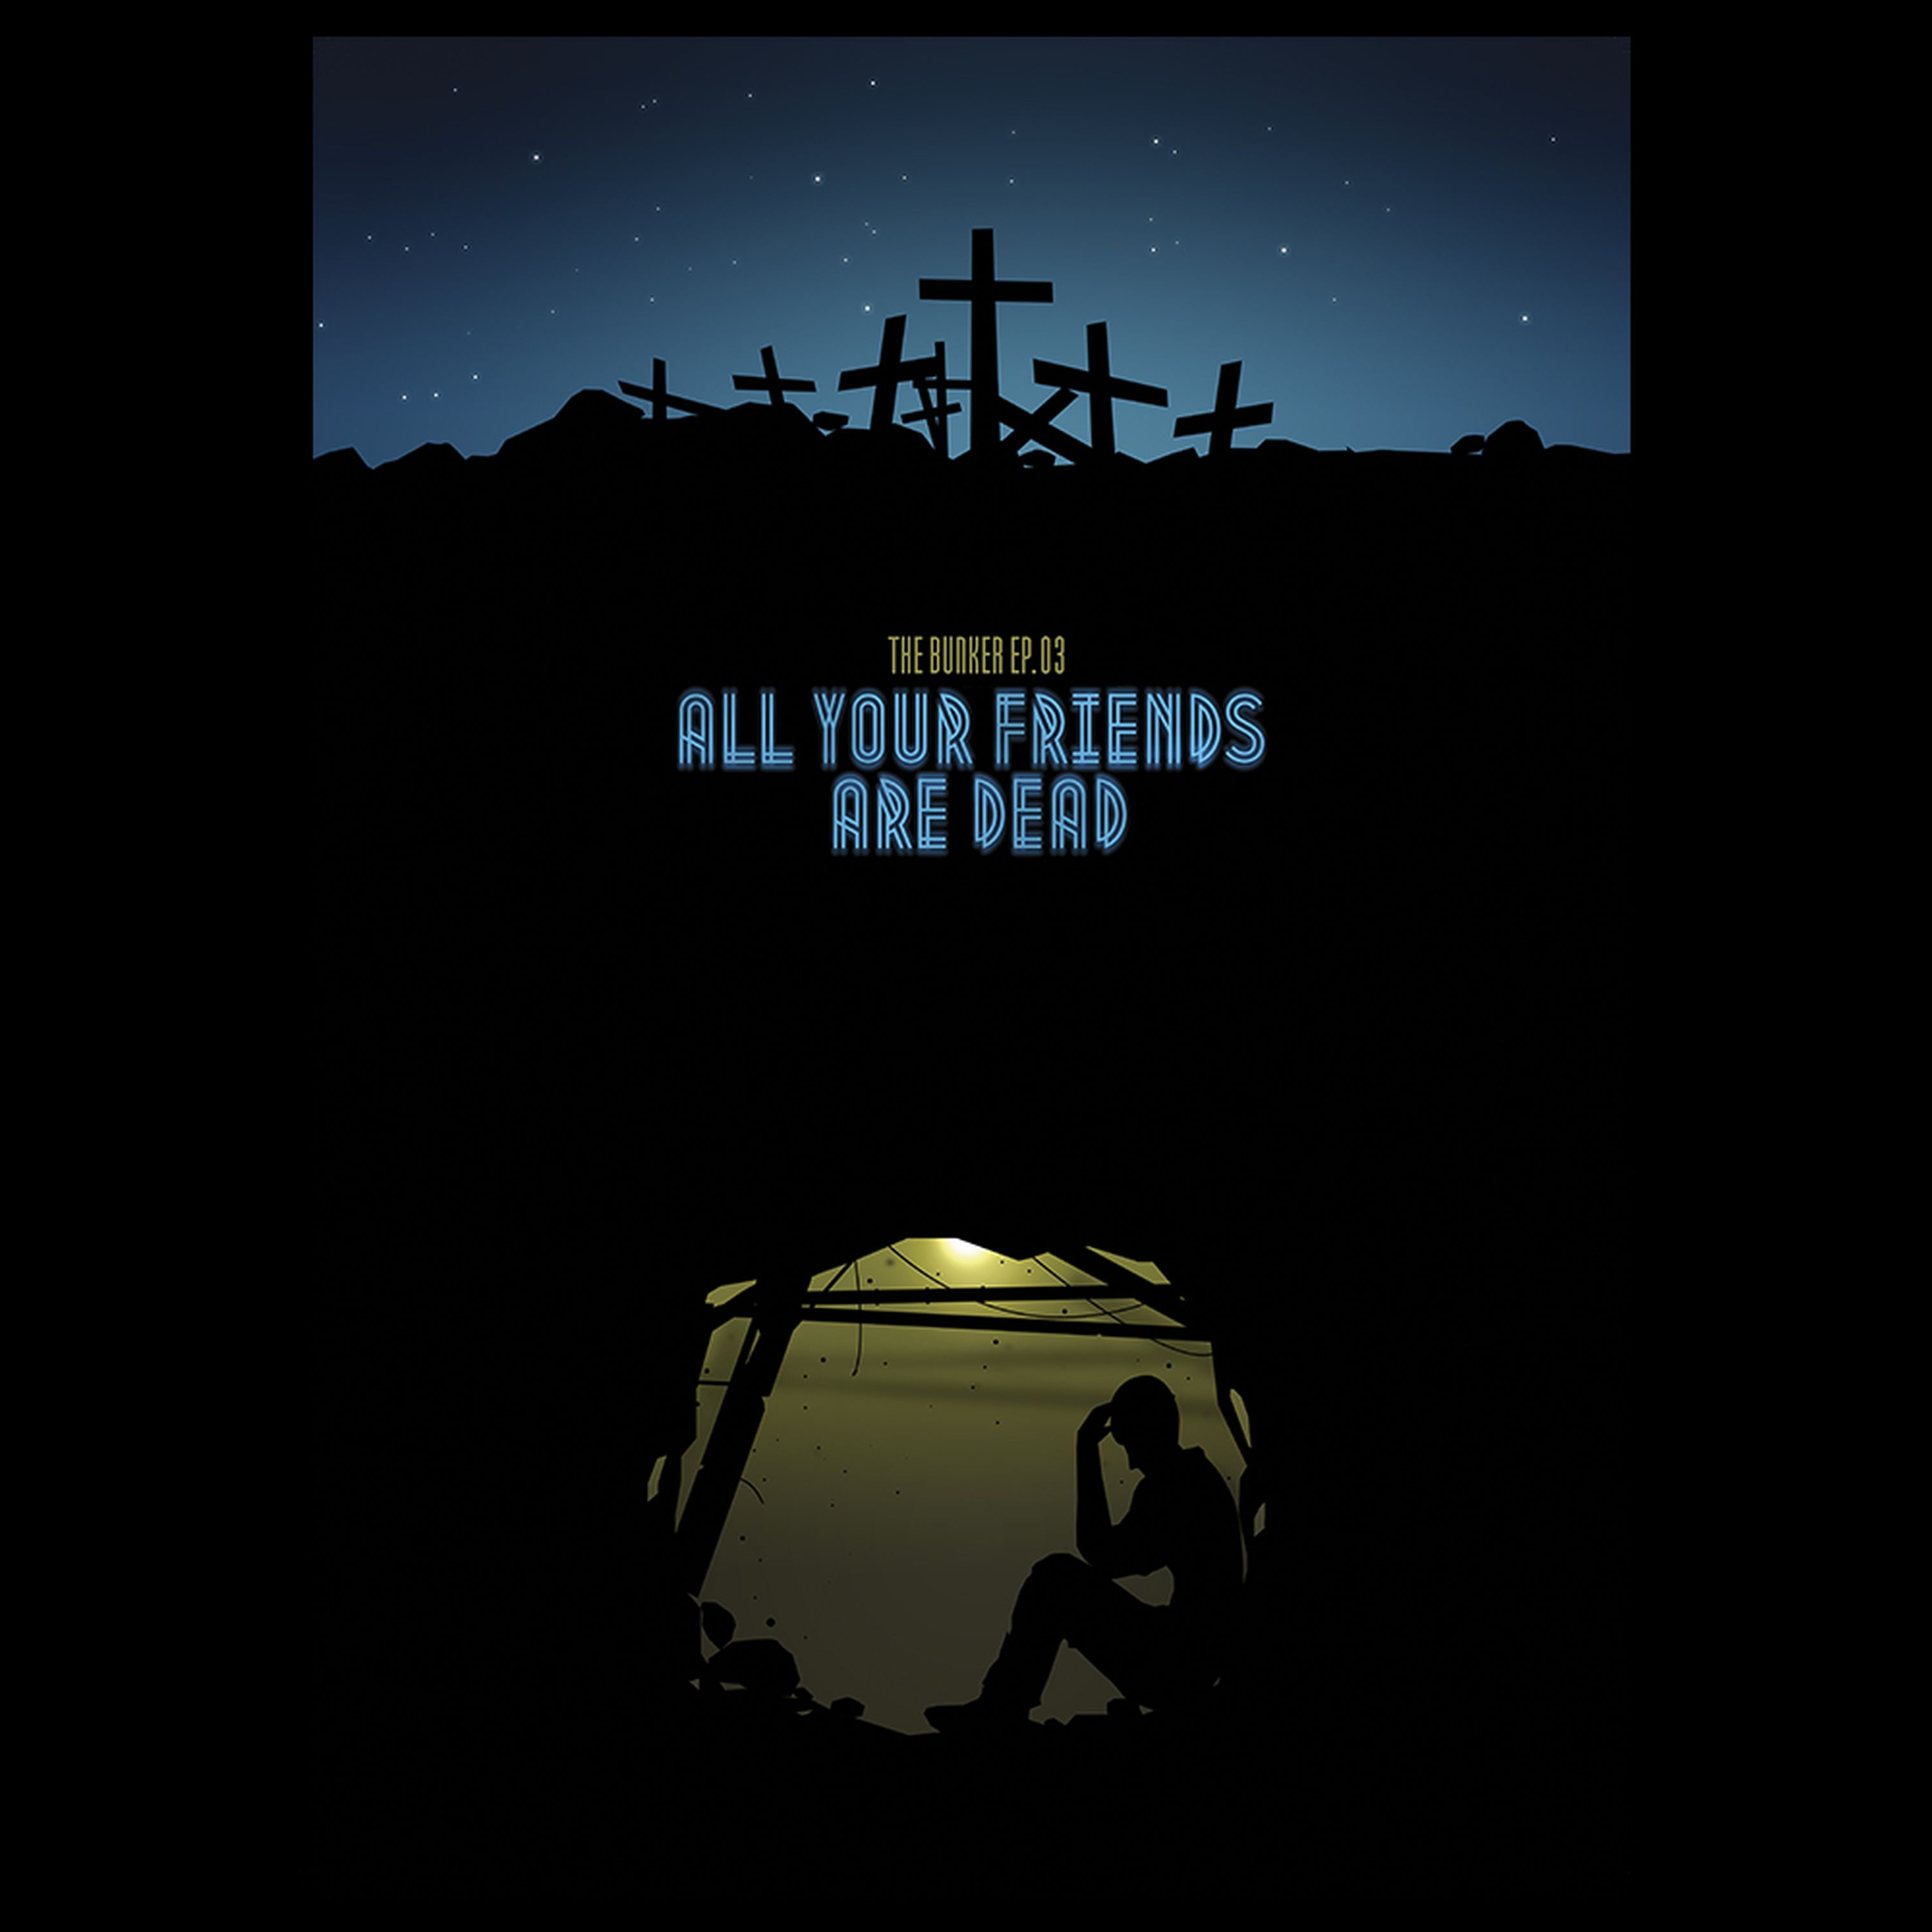 Episode Three – All Your Friends Are Dead